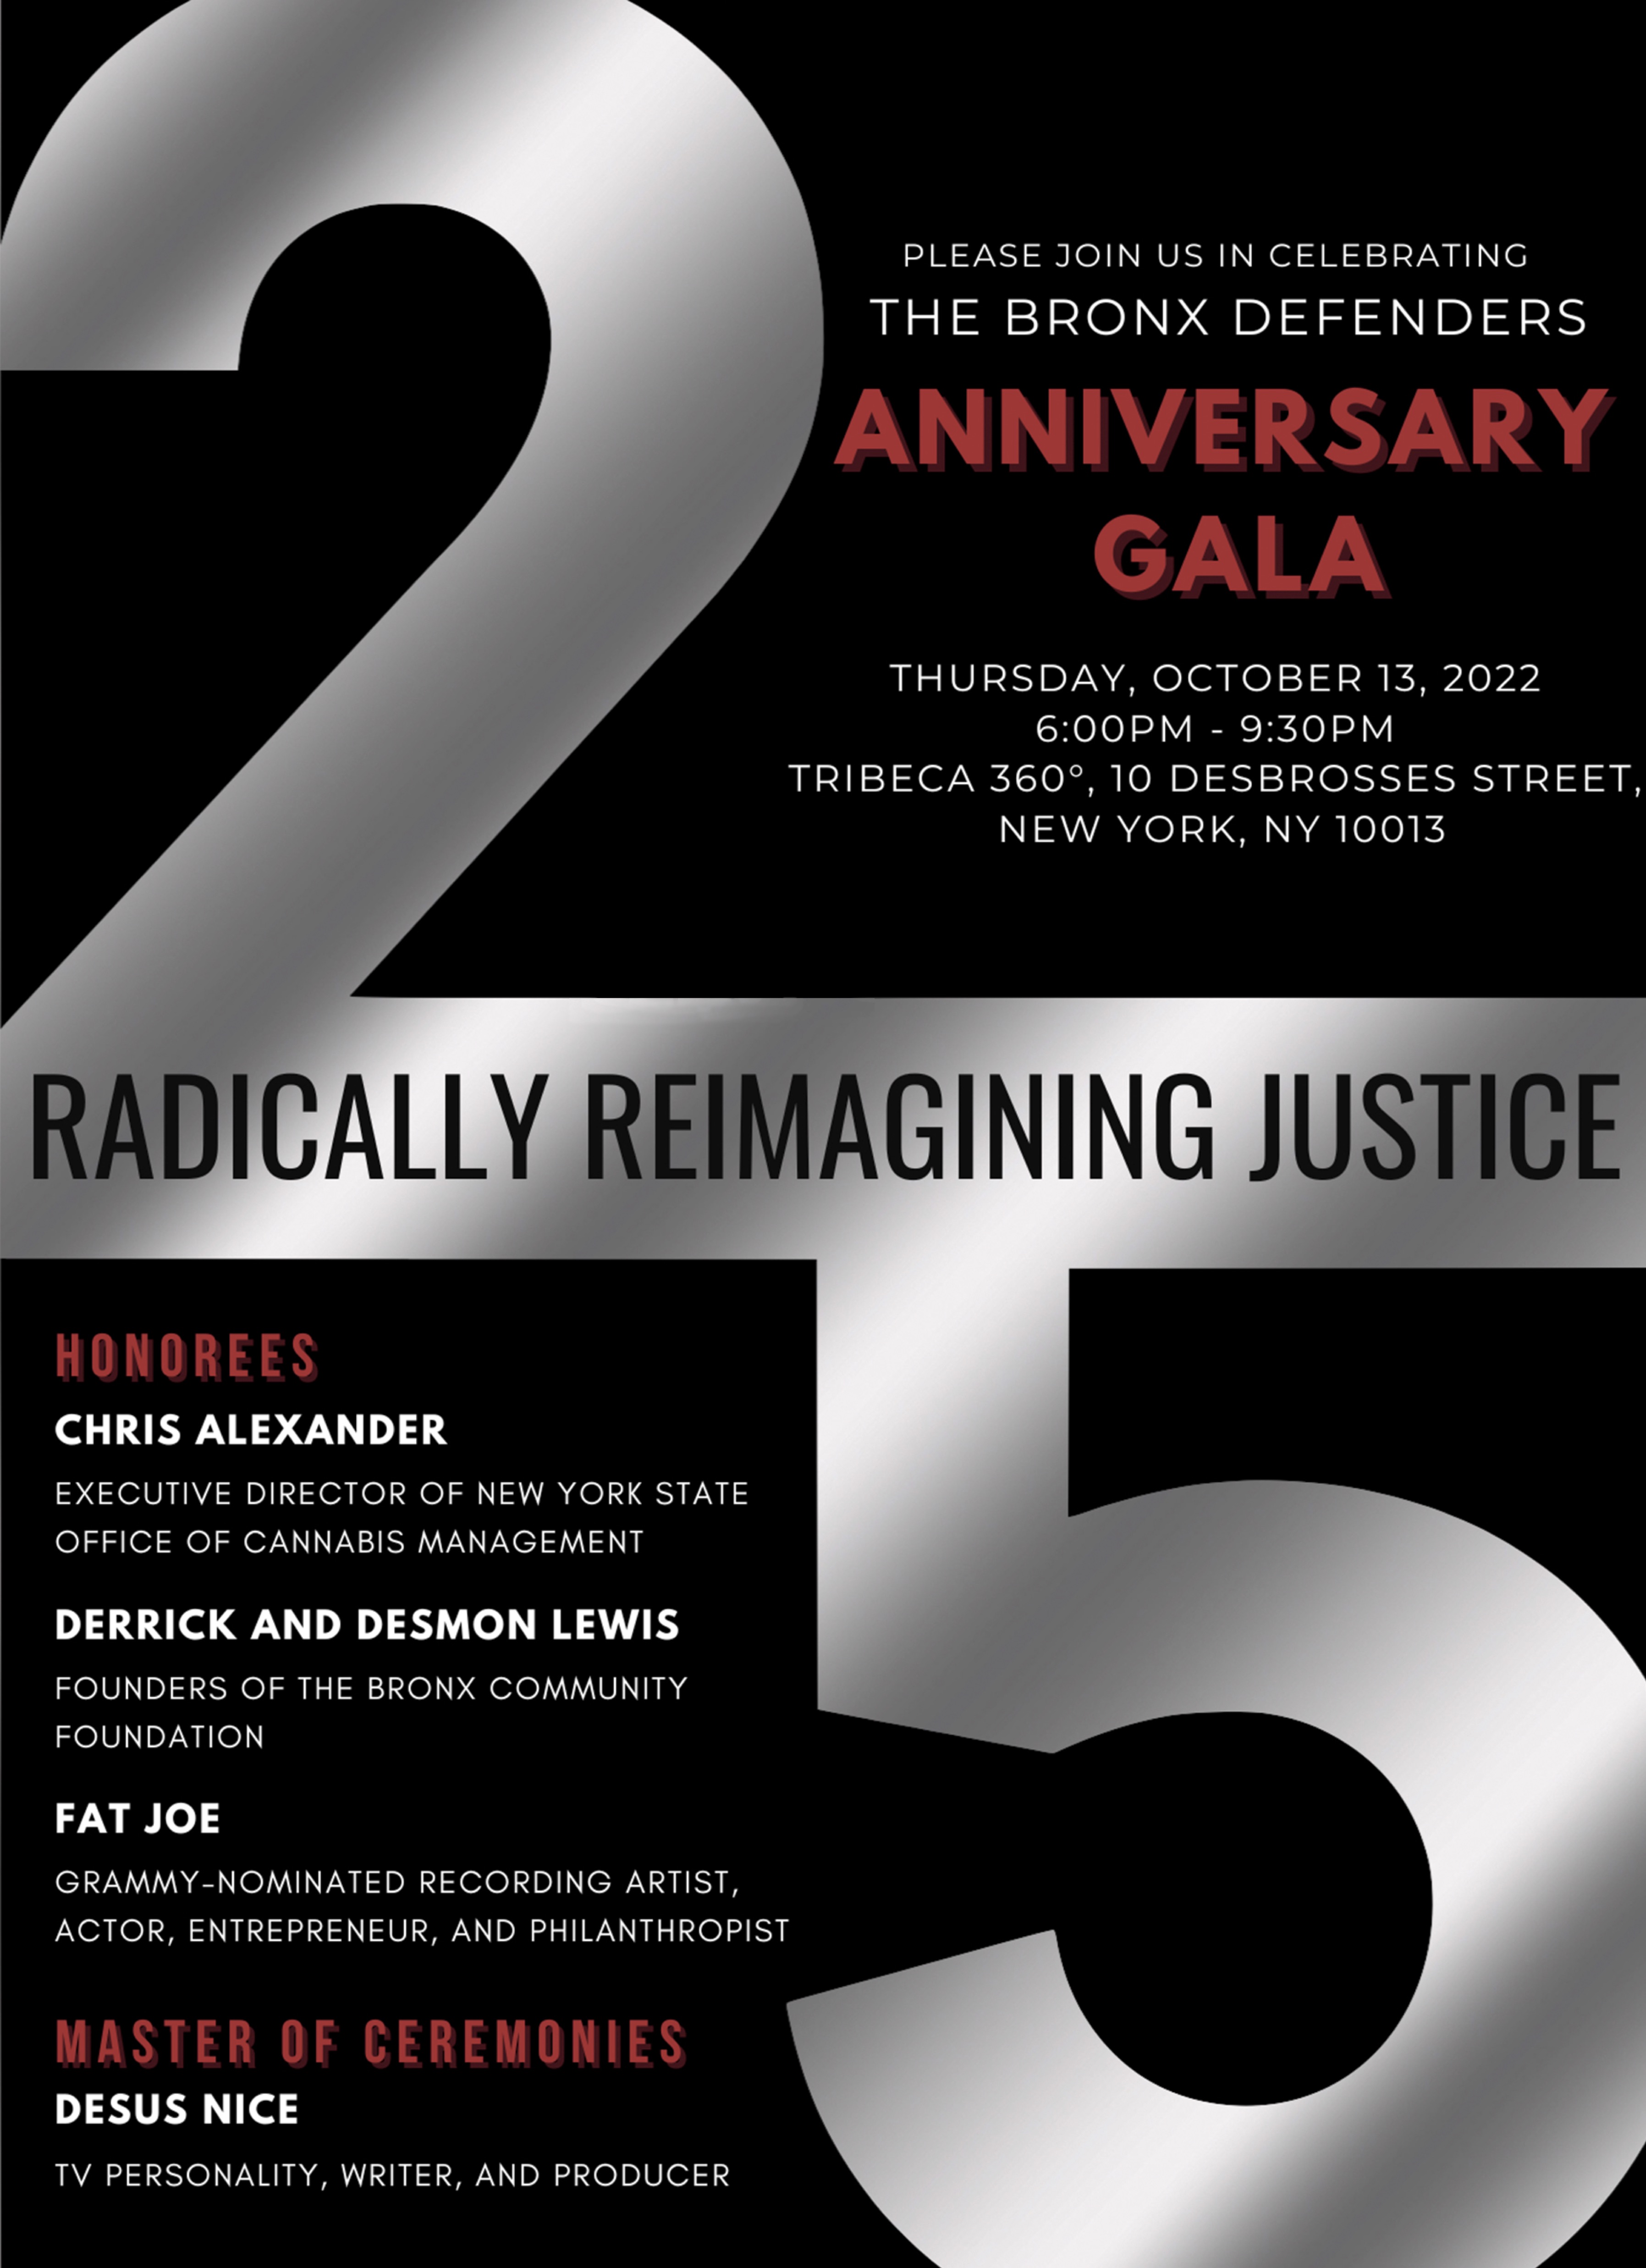 Please join us in celebrating The Bronx Defenders 25th Anniversary Gala; Thursday, October 13, 2022 6 to 9:30PM; Tribeca 360, 10 Desbrosses Street, New York, New York 10013; Honorees: Chris Alexander, Executive Director of New York State Office of Cannabis Management; Derrick and Desmon Lewis, Founders of The Bronx Community Foundation; and Fat Joe, Grammy-nominated Recording Artist, Actor, Entrepreneur and Philanthropist; Master of Ceremonies: Desus Nice, TV Personality, Writer, and Producer